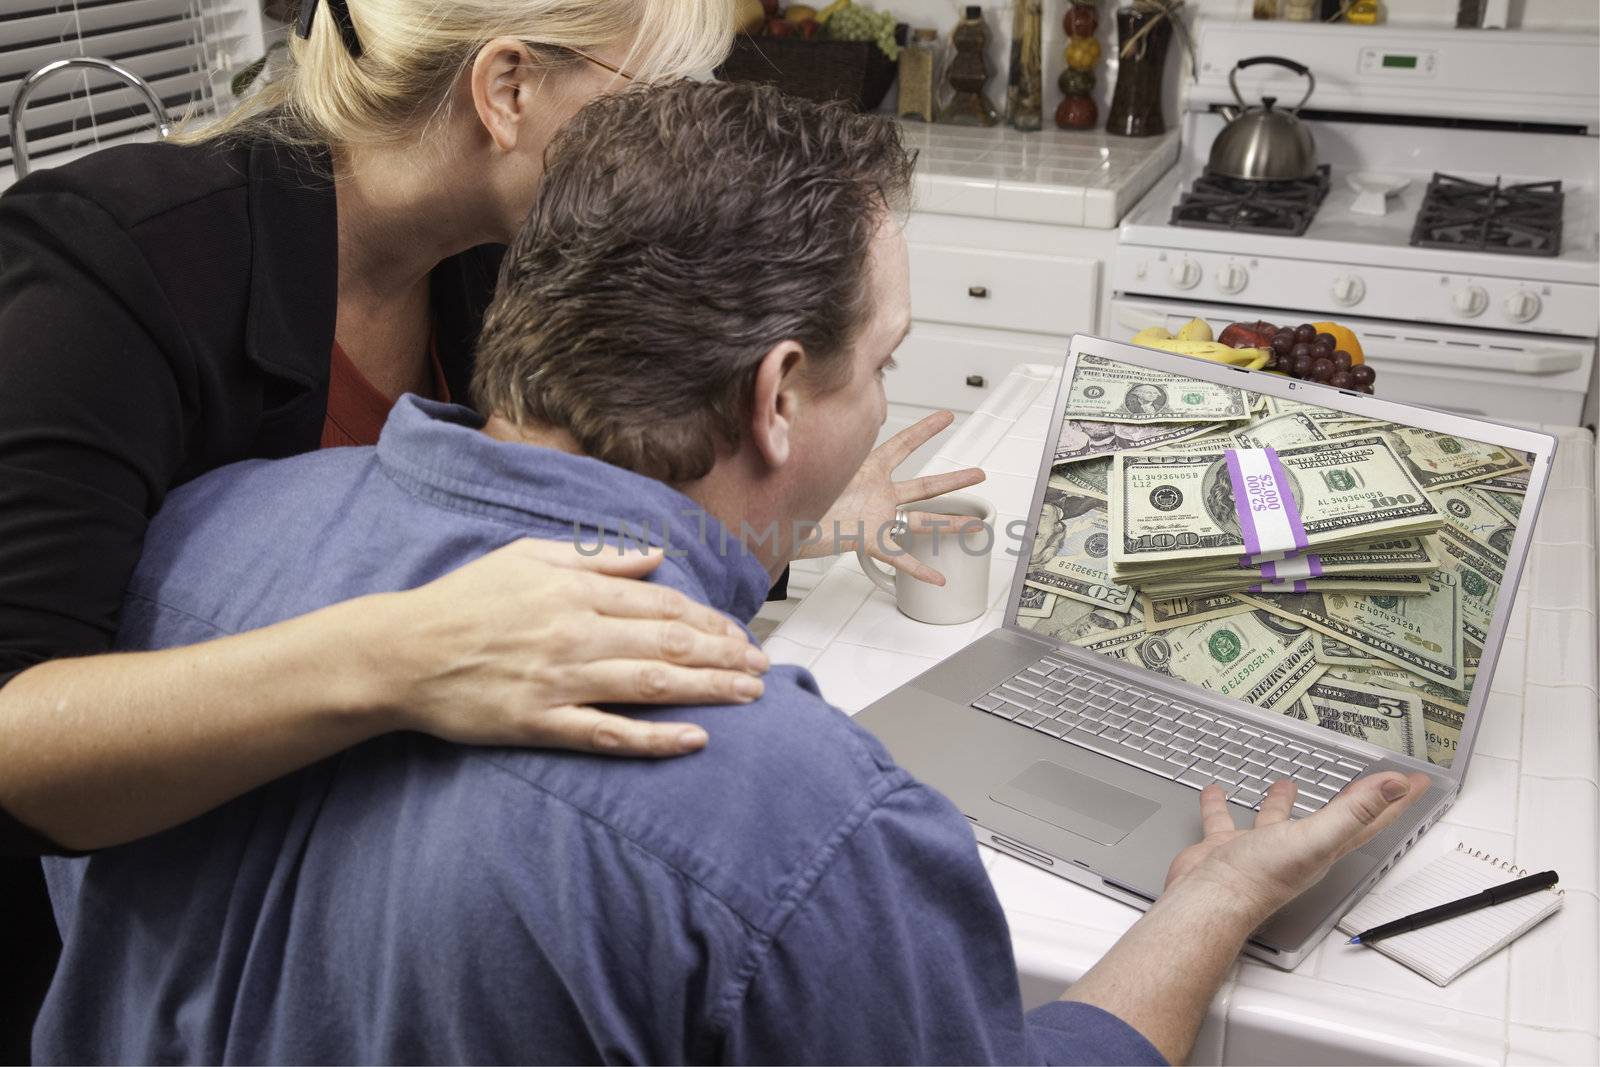 Couple In Kitchen Using Laptop - Money by Feverpitched